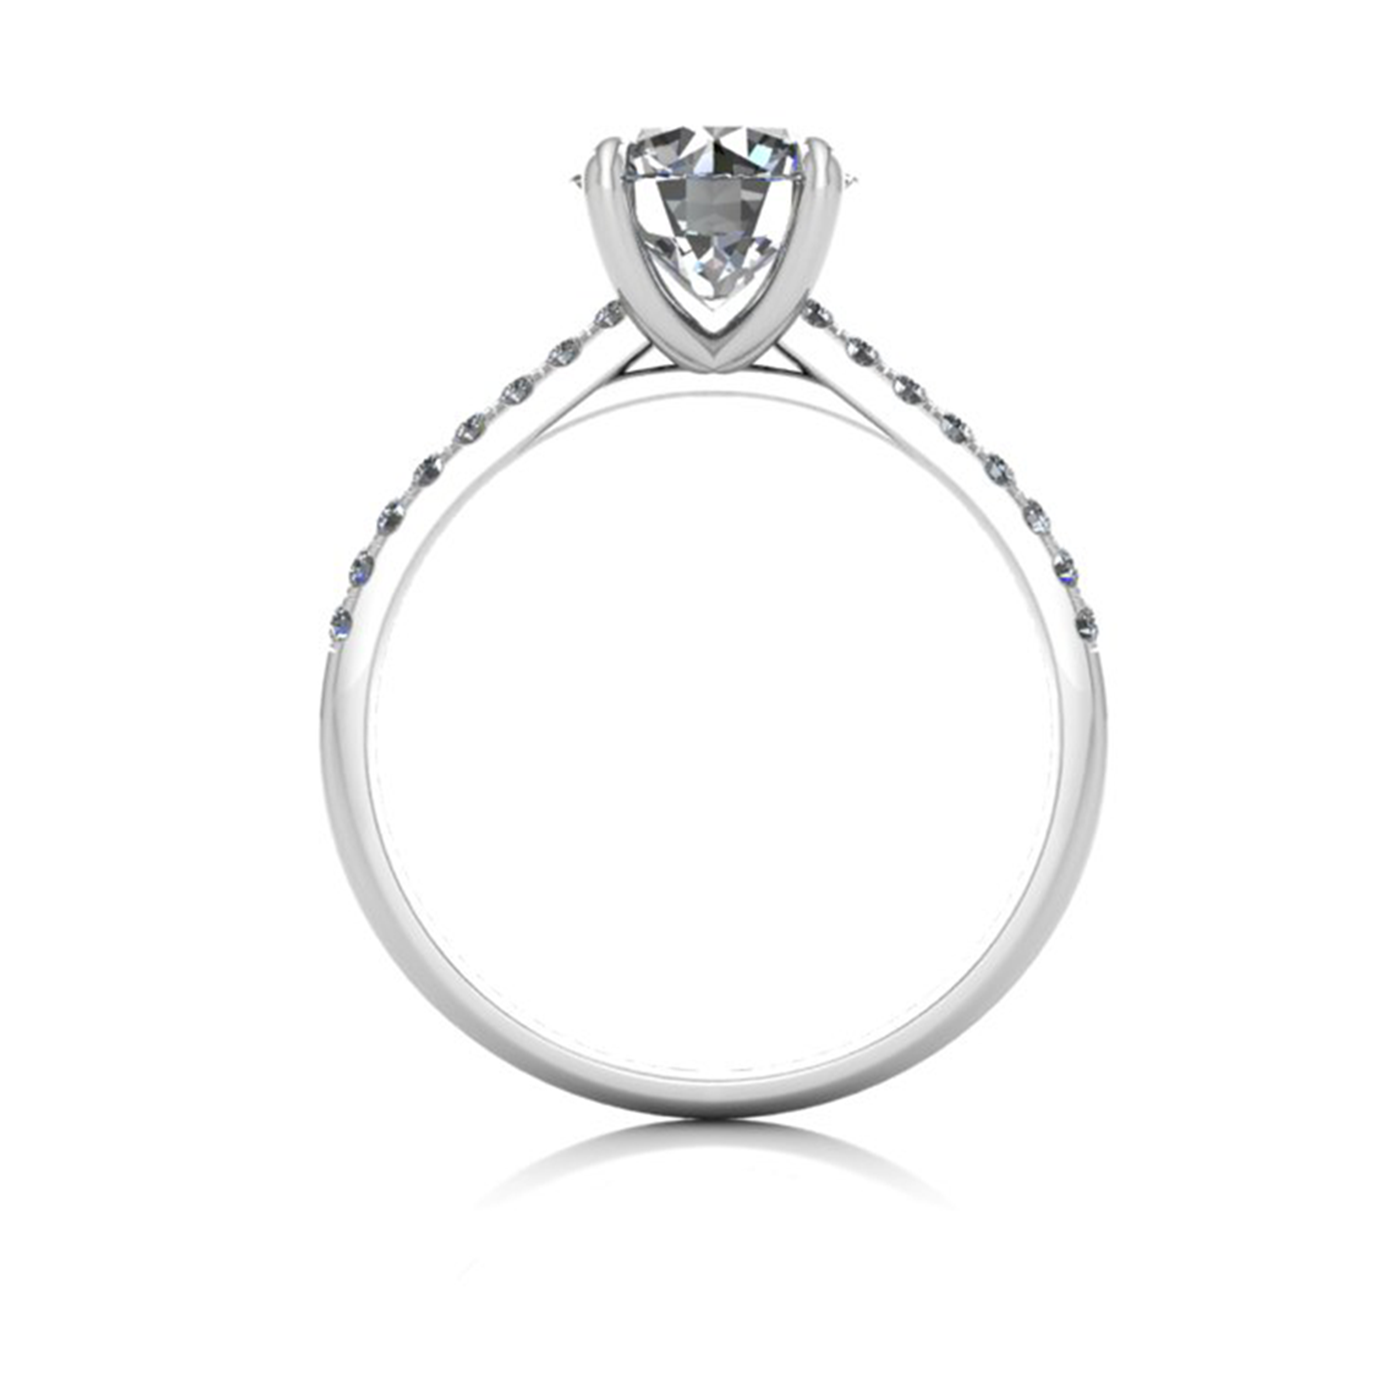 18k white gold 1.5ct 4 prongs round cut diamond engagement ring with whisper thin pavÉ set band